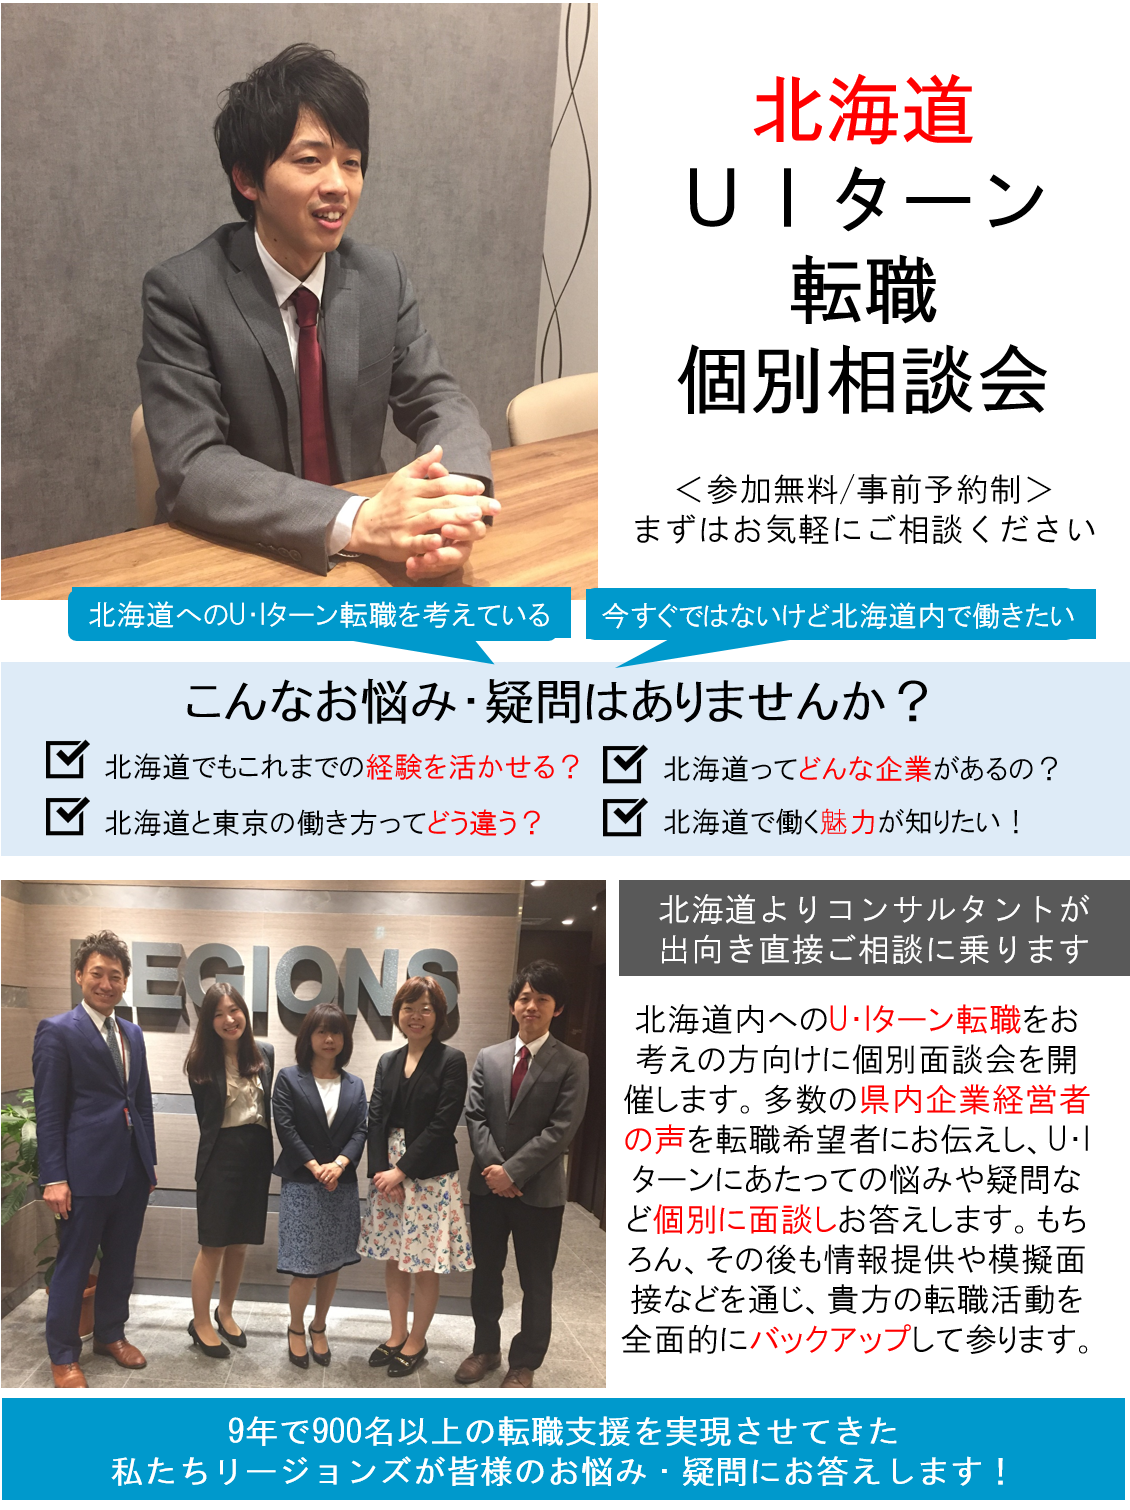 http://www.regional.co.jp/career_mt/%E5%8C%97%E6%B5%B7%E9%81%93%E8%8D%BB%E9%87%8Ever.png